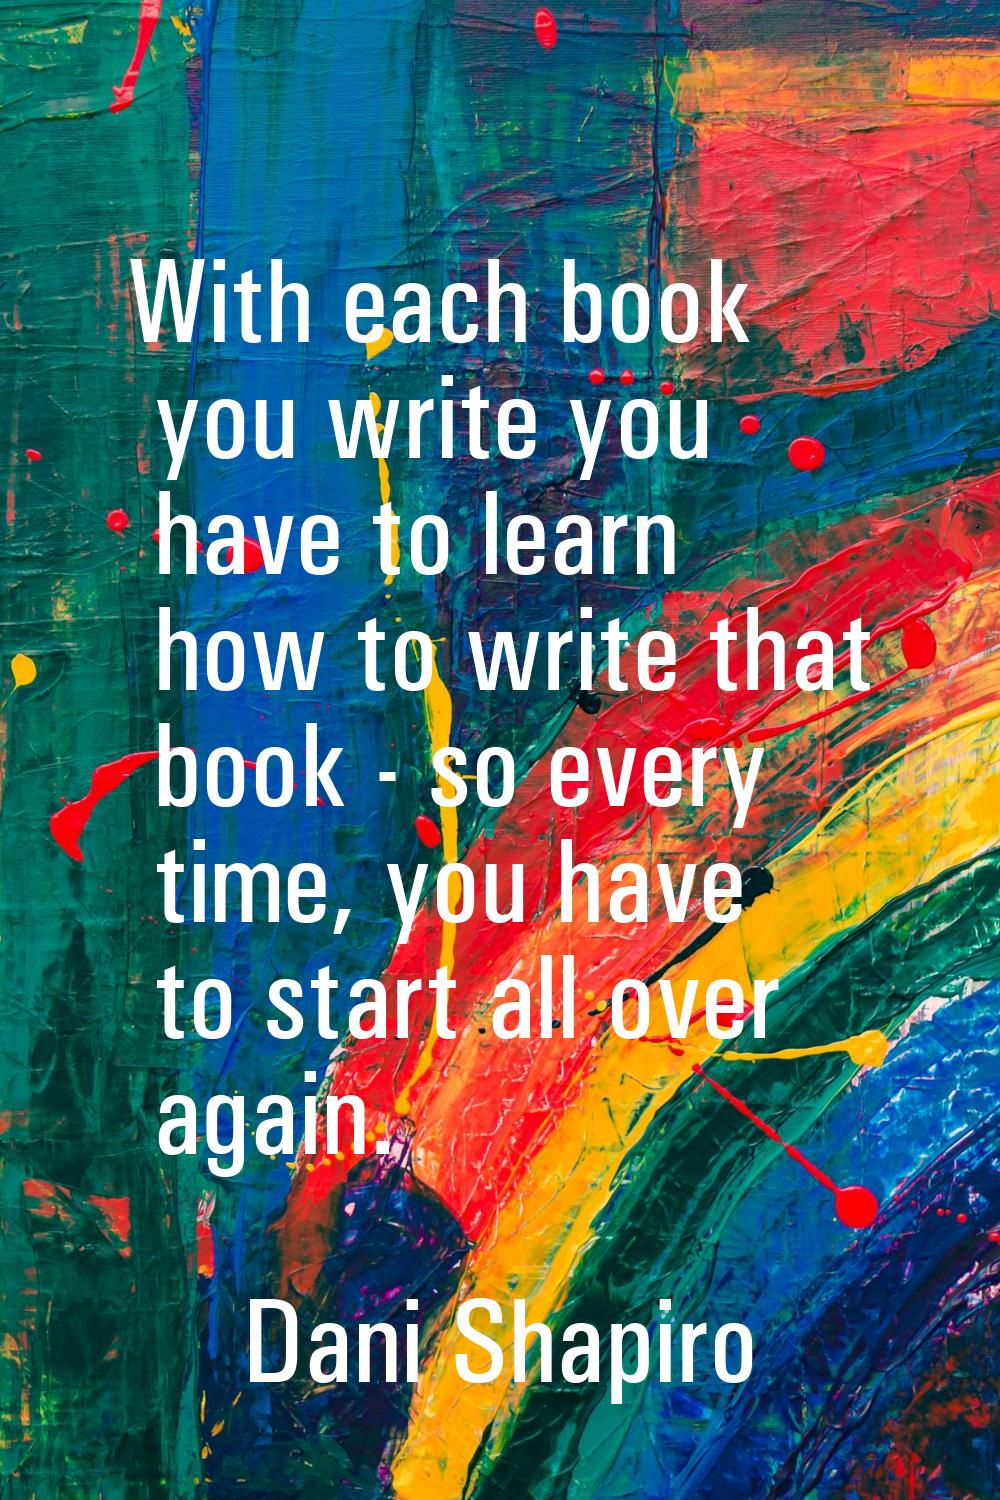 With each book you write you have to learn how to write that book - so every time, you have to star